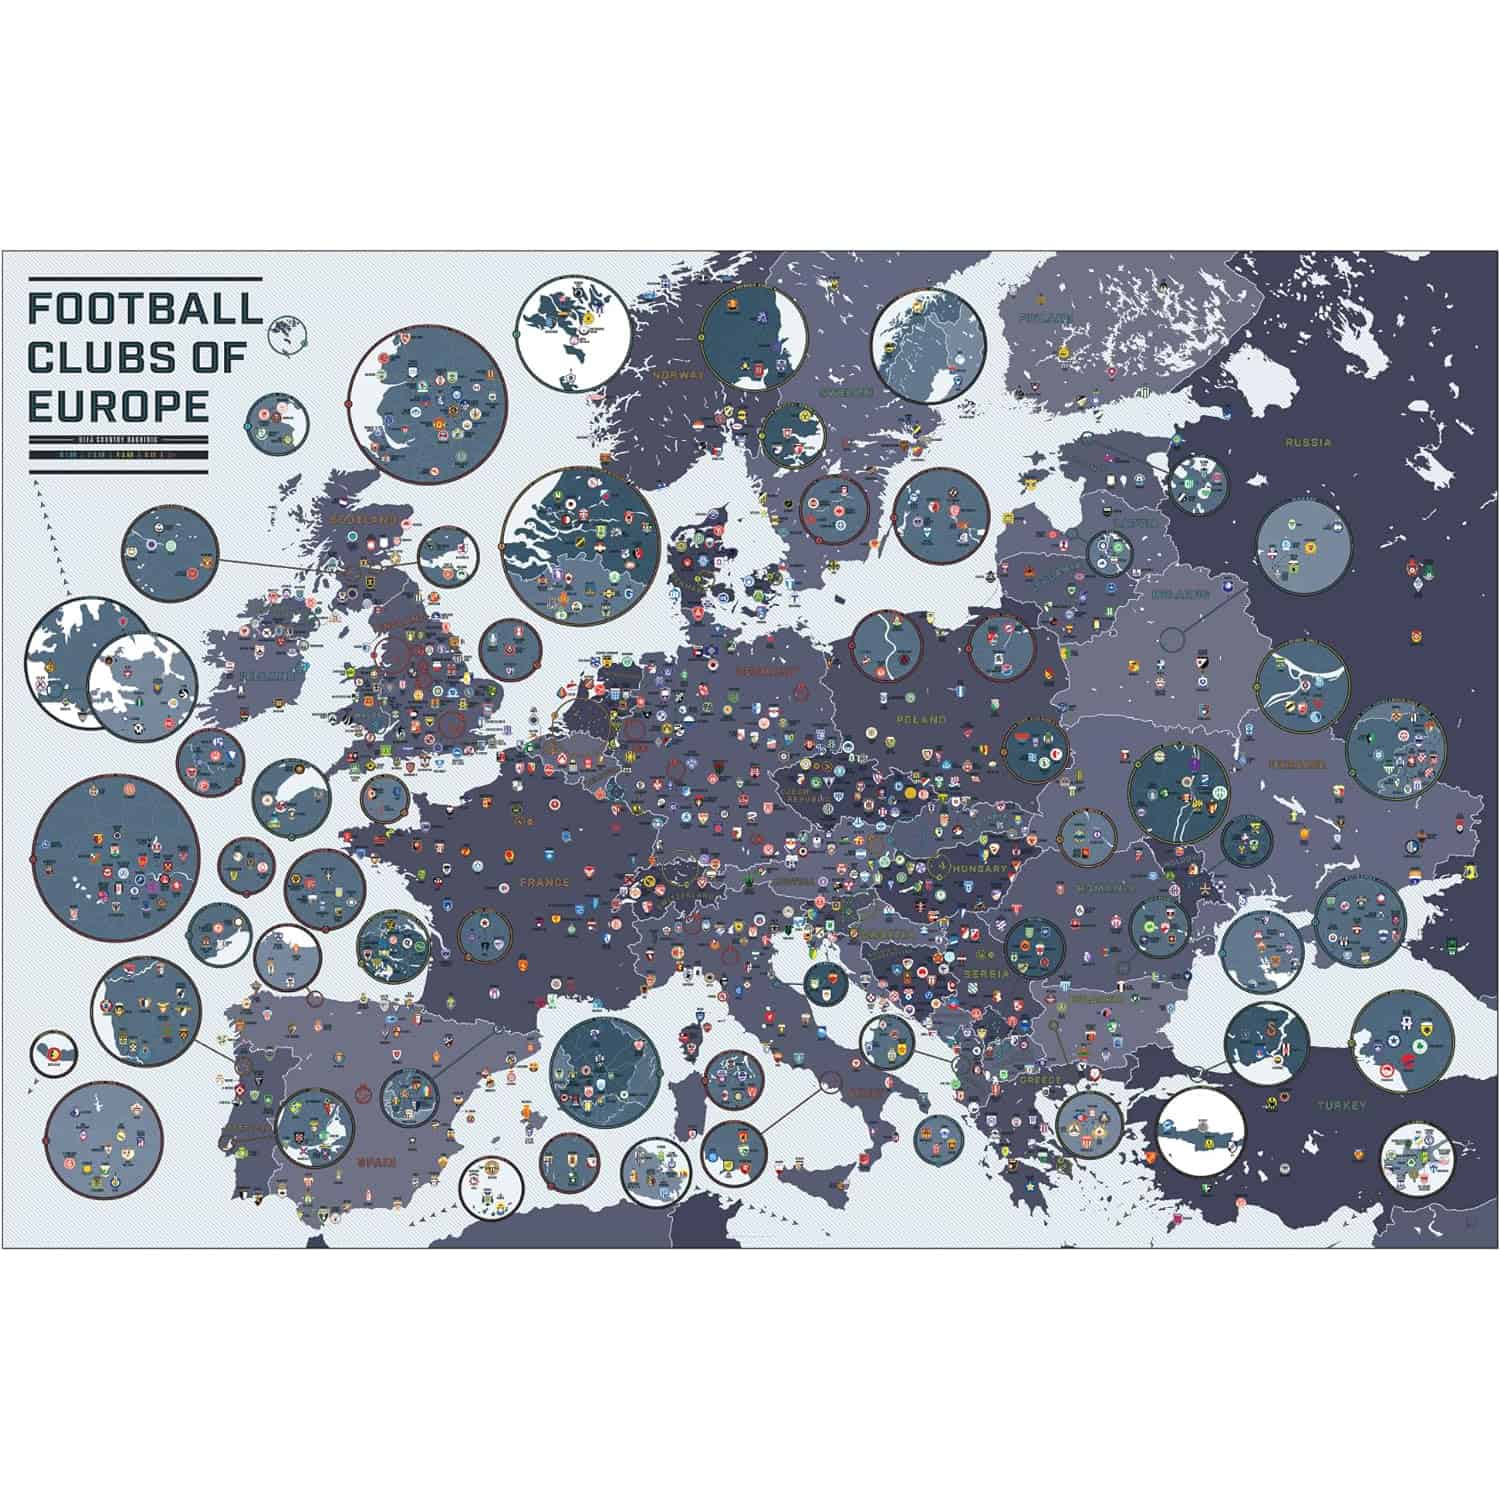 The Definitive Football Clubs Map